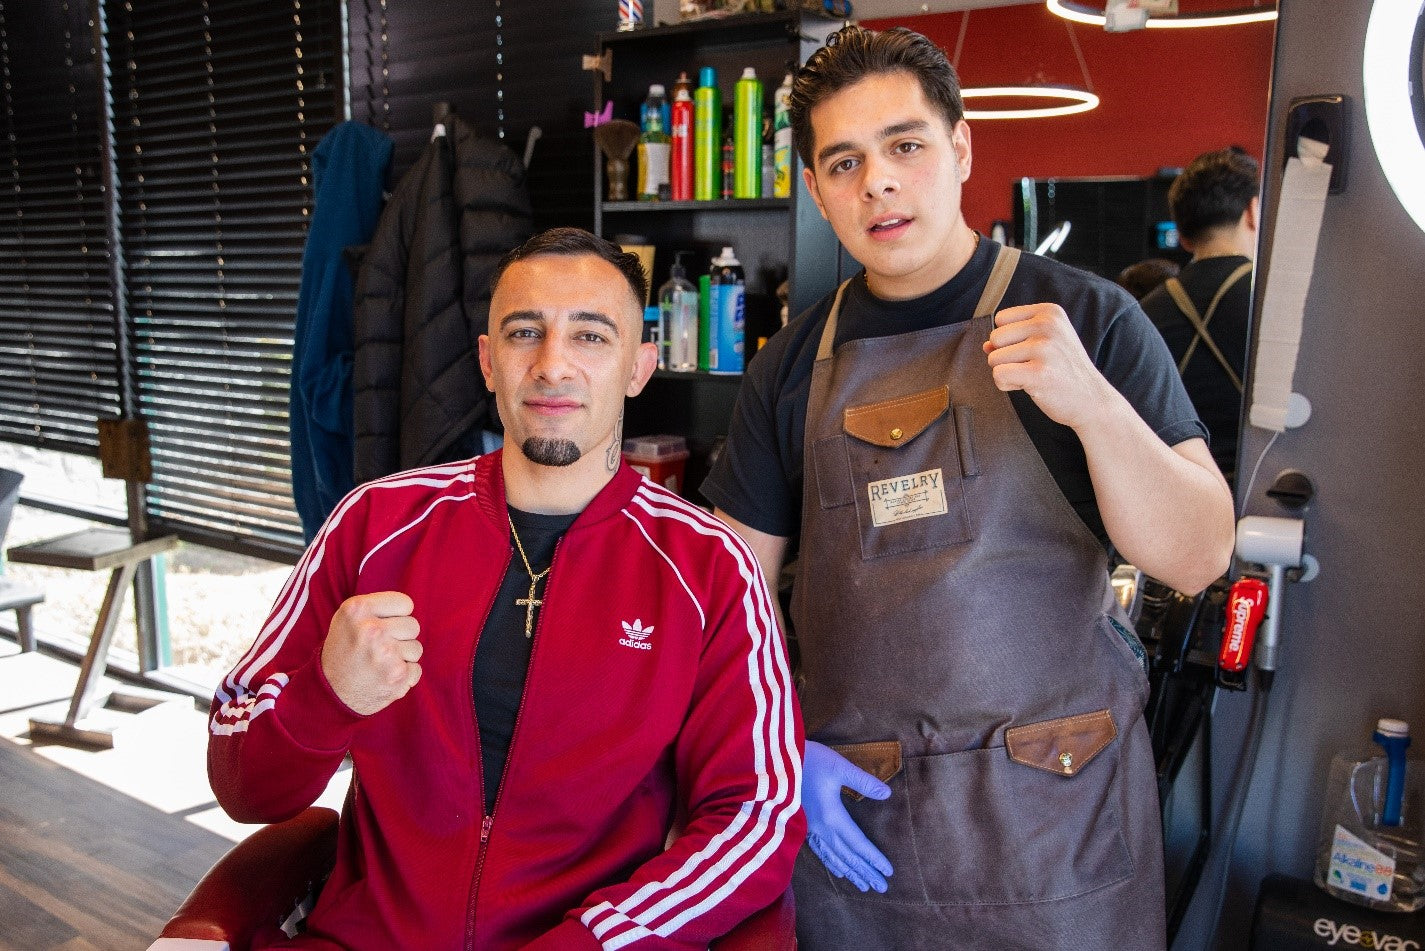 A barber with brown apron standing next to a client in a red sweater